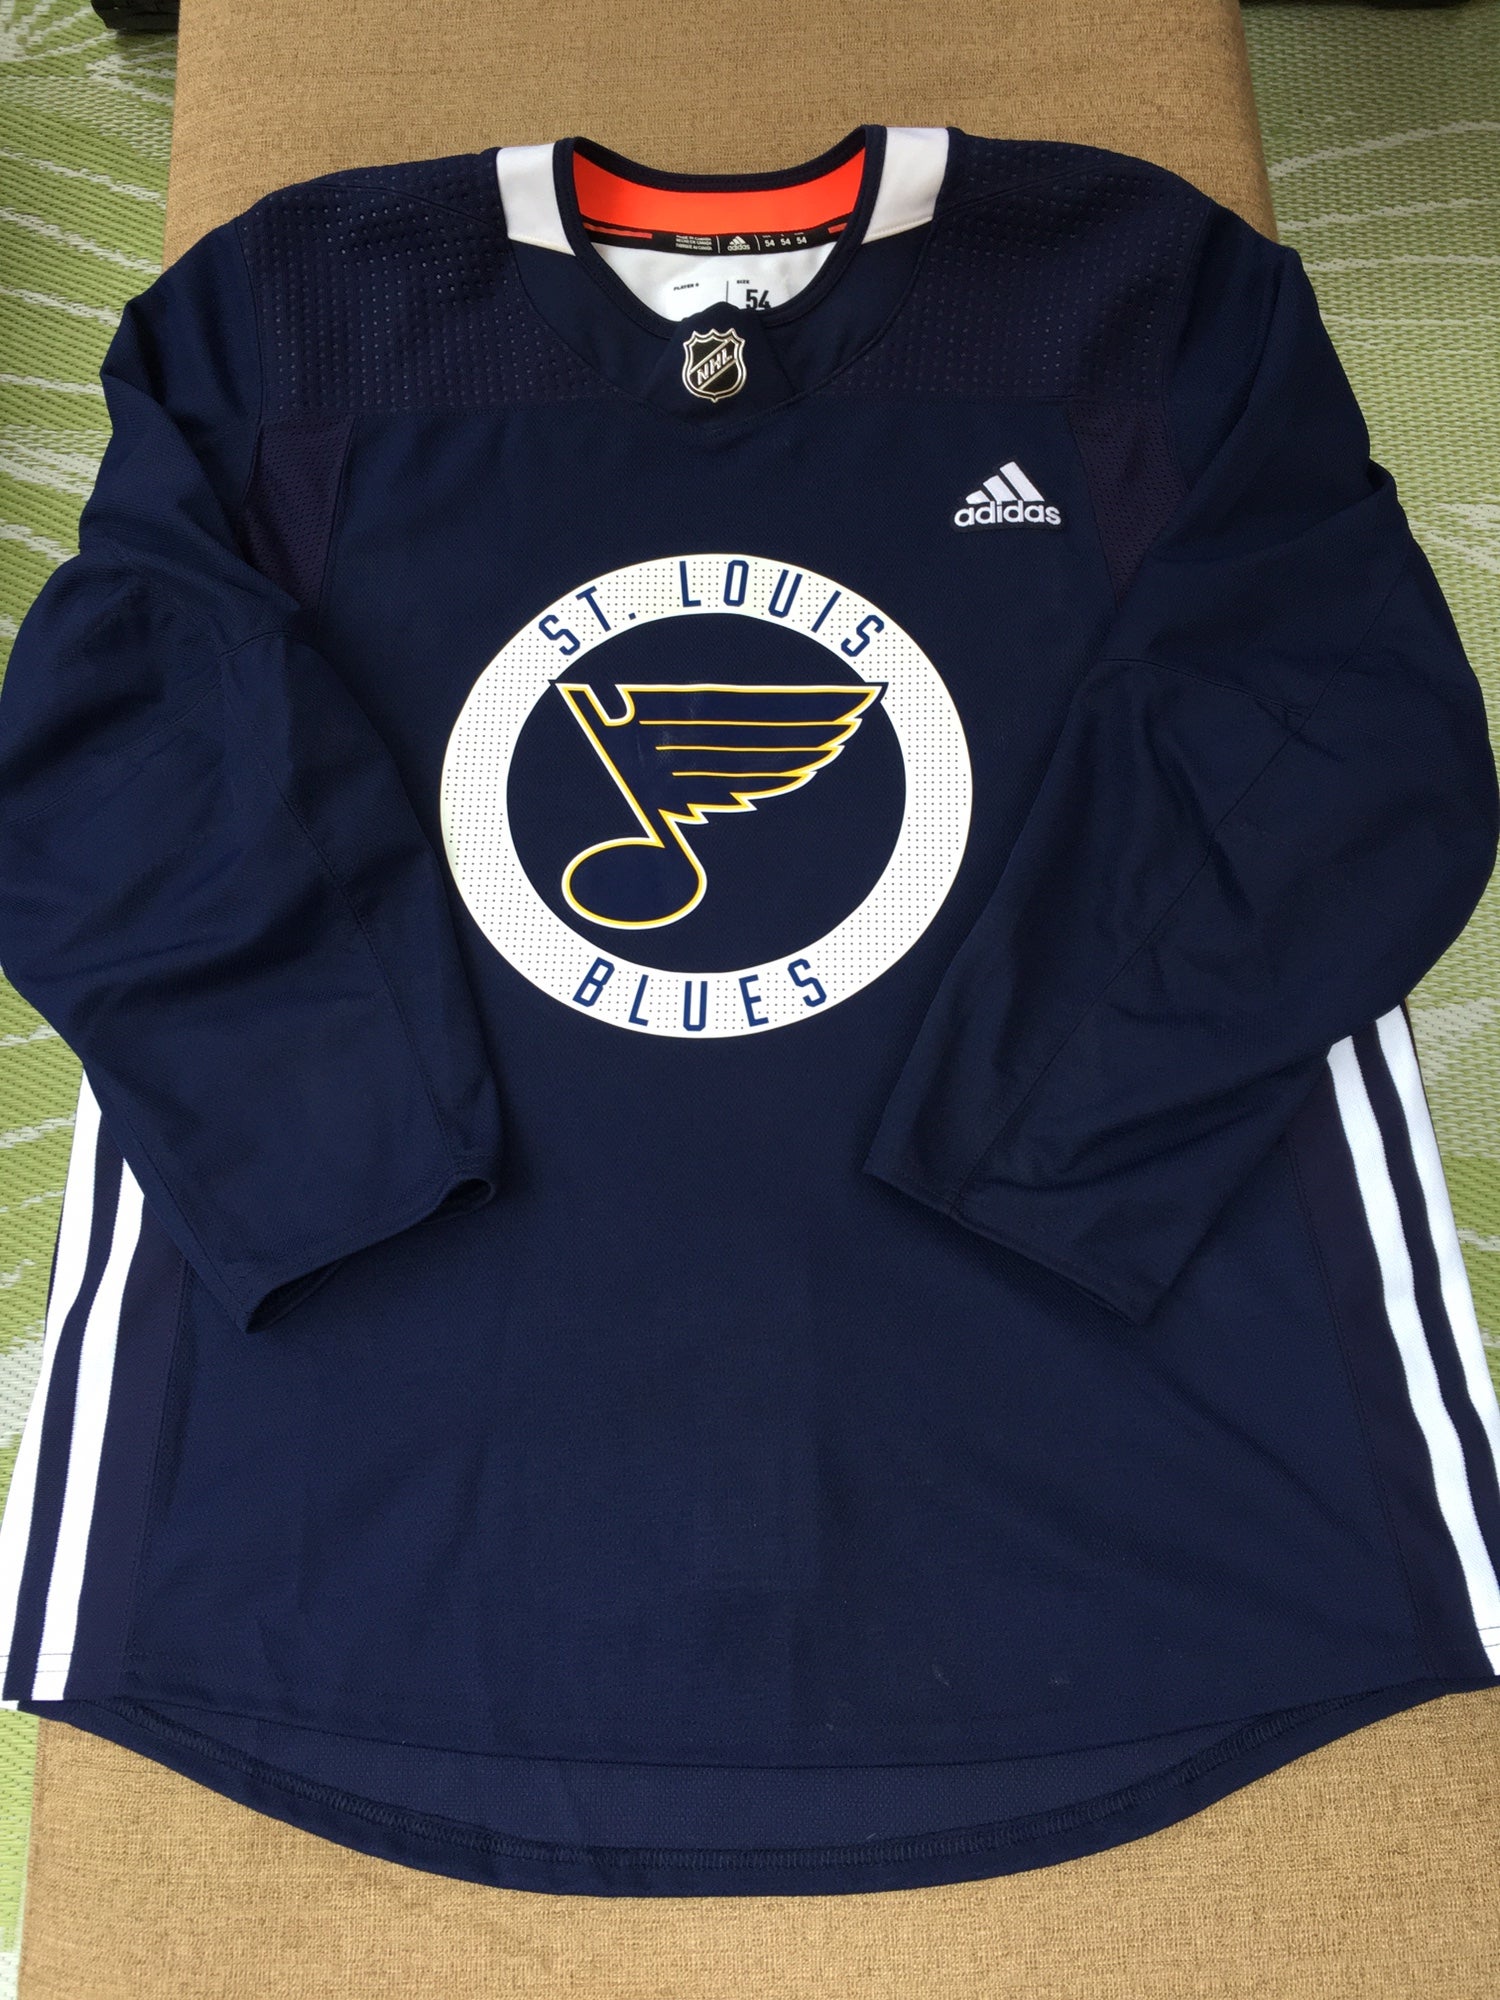 At Auction: Adidas NHL Louis Blues Climalite Authentic Practice